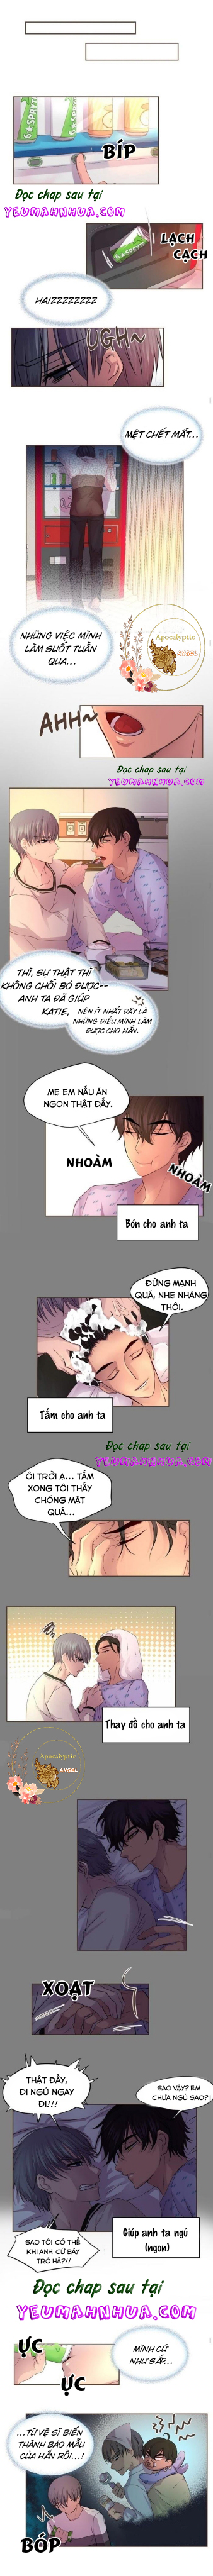 Giữa Em Thật Chặt (Hold Me Tight) Chapter 20 - Trang 6